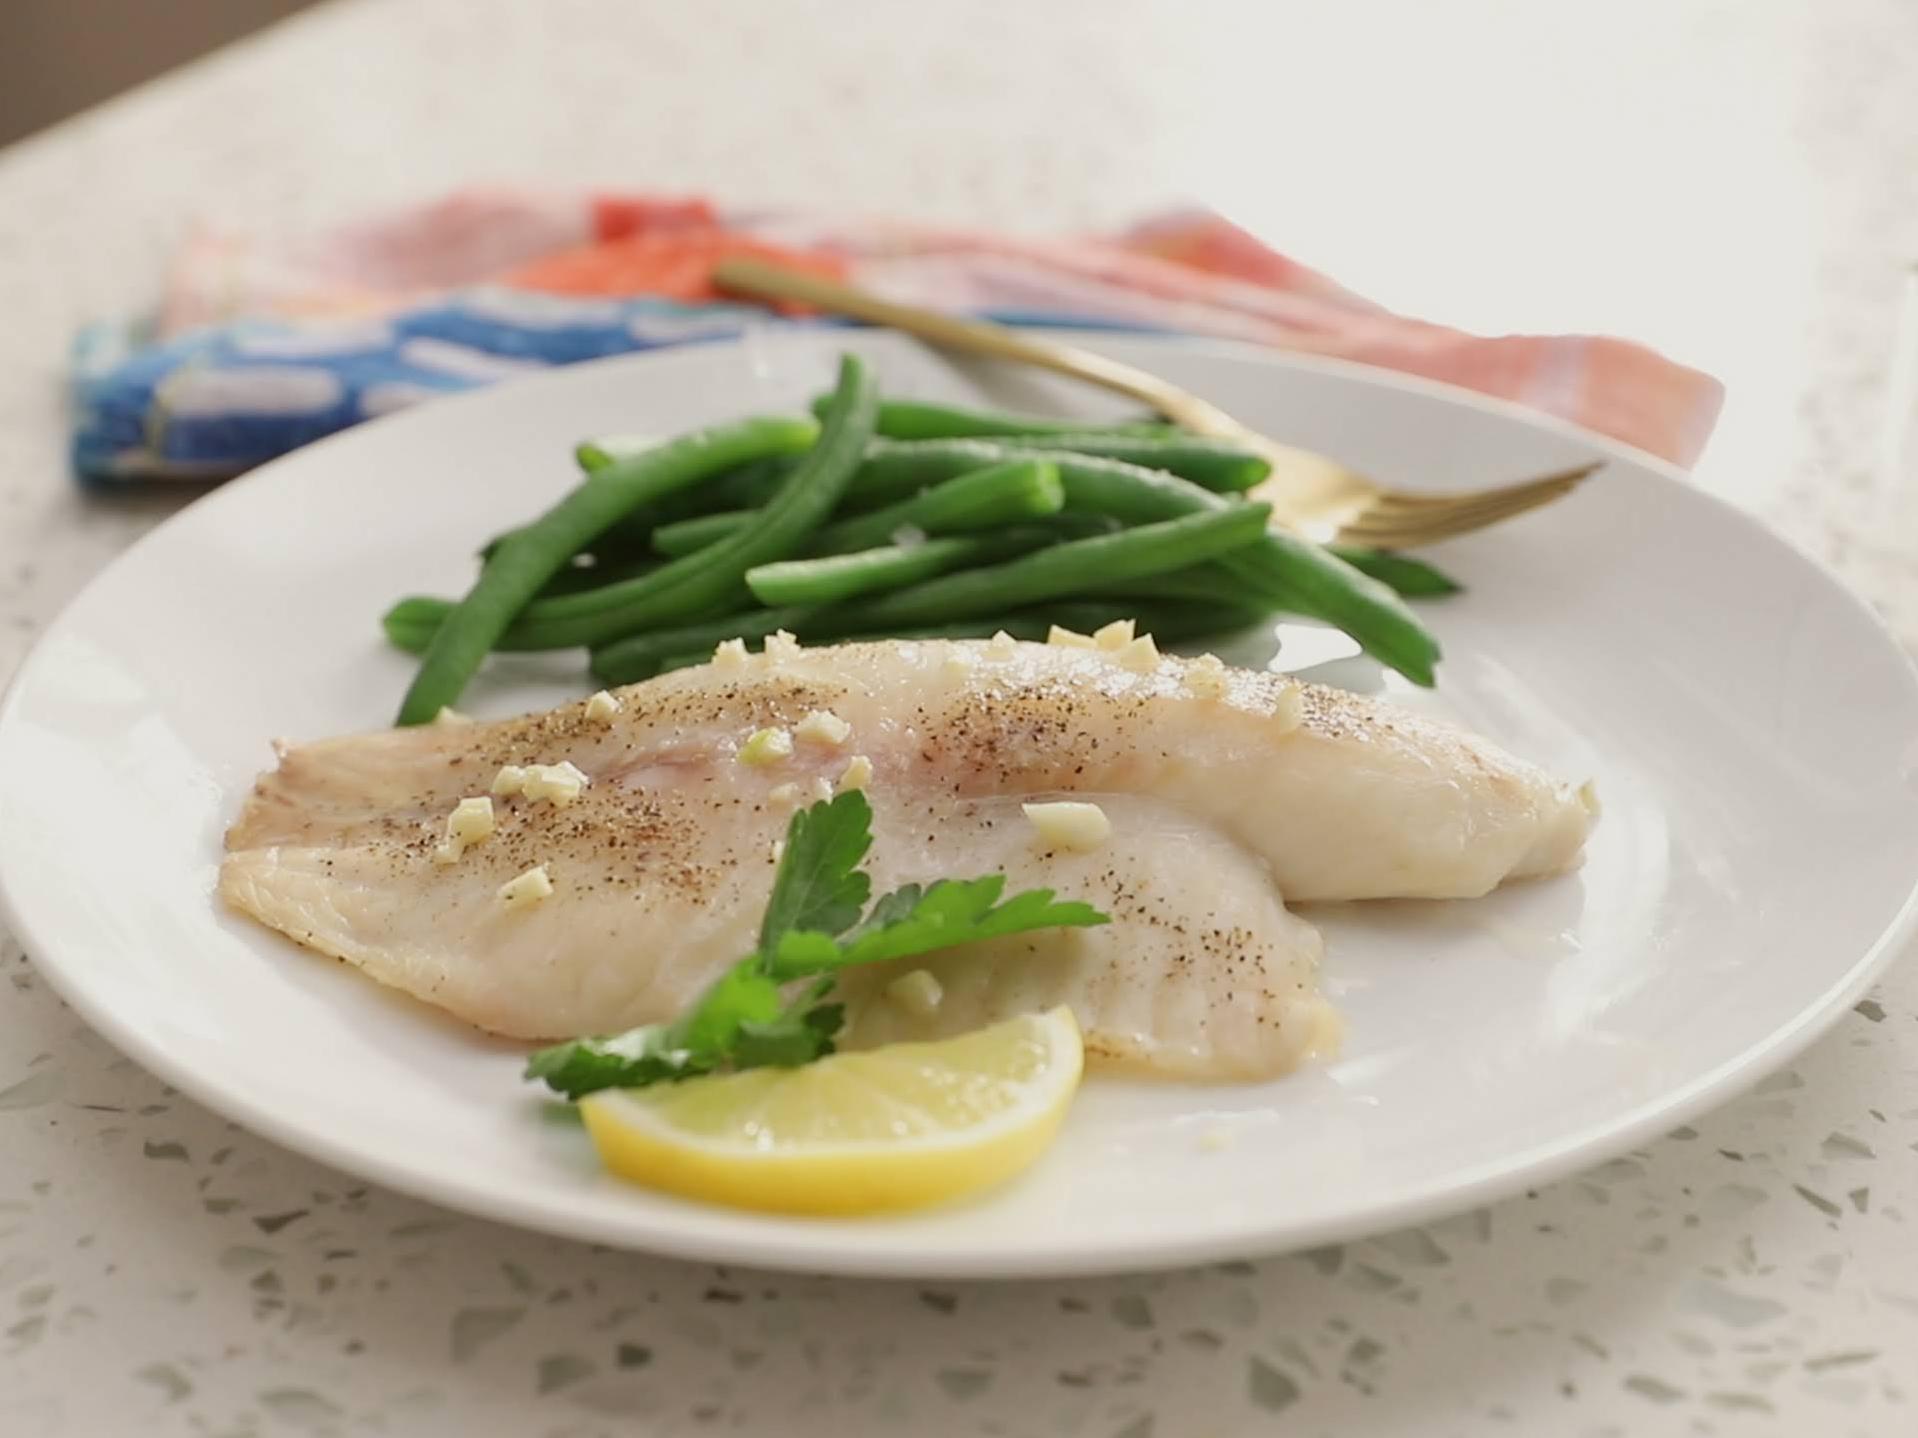  Spicing up your dinner game with this flavorful tilapia dish!